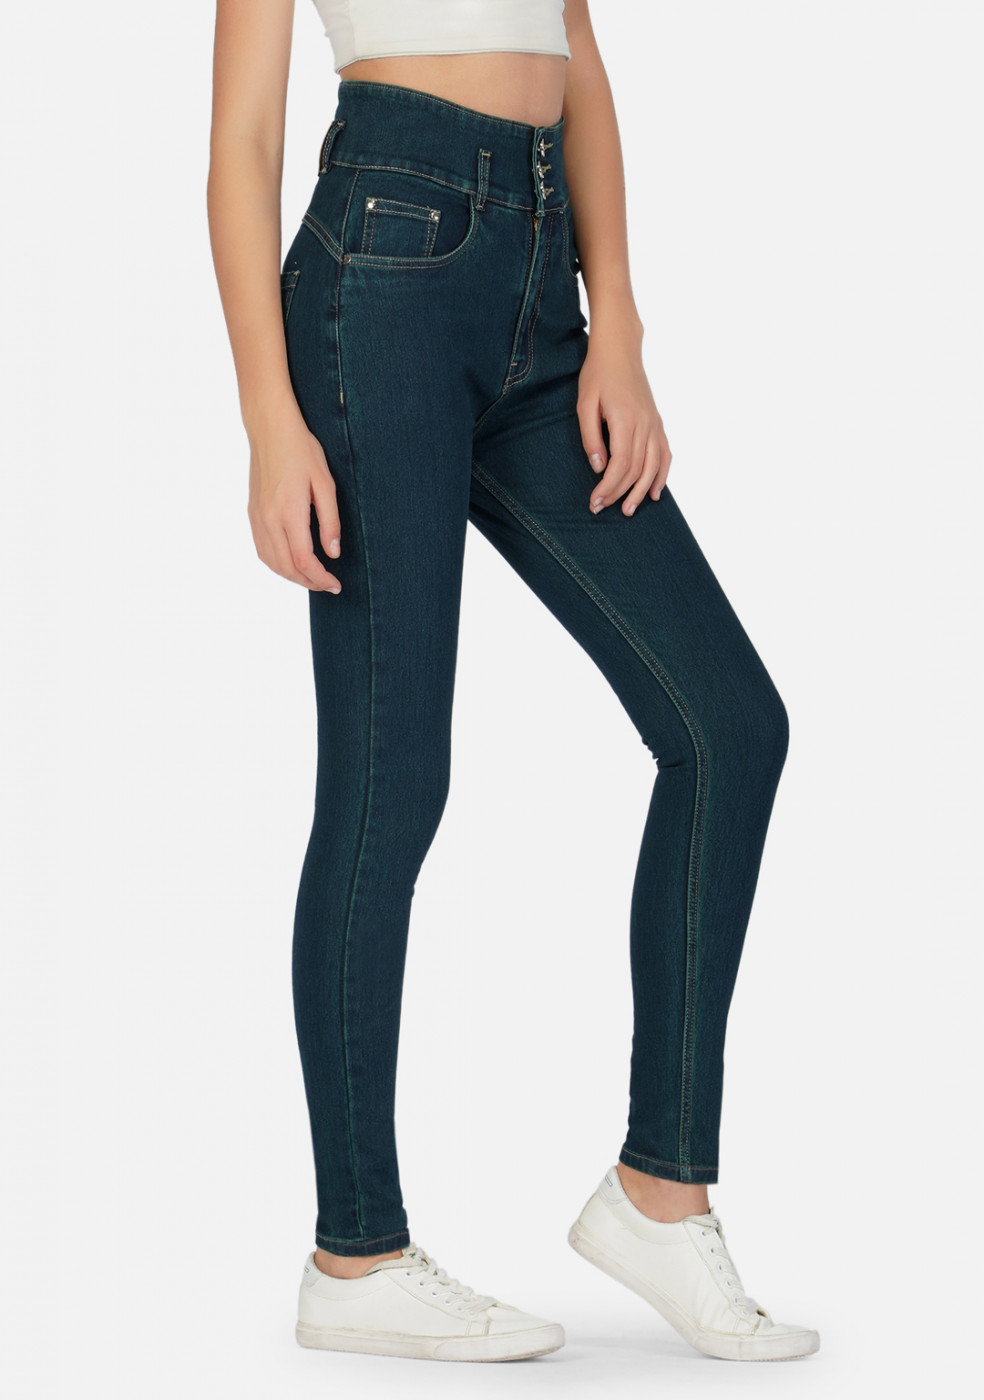 TINT Stretchable Cotton Jeans For Women